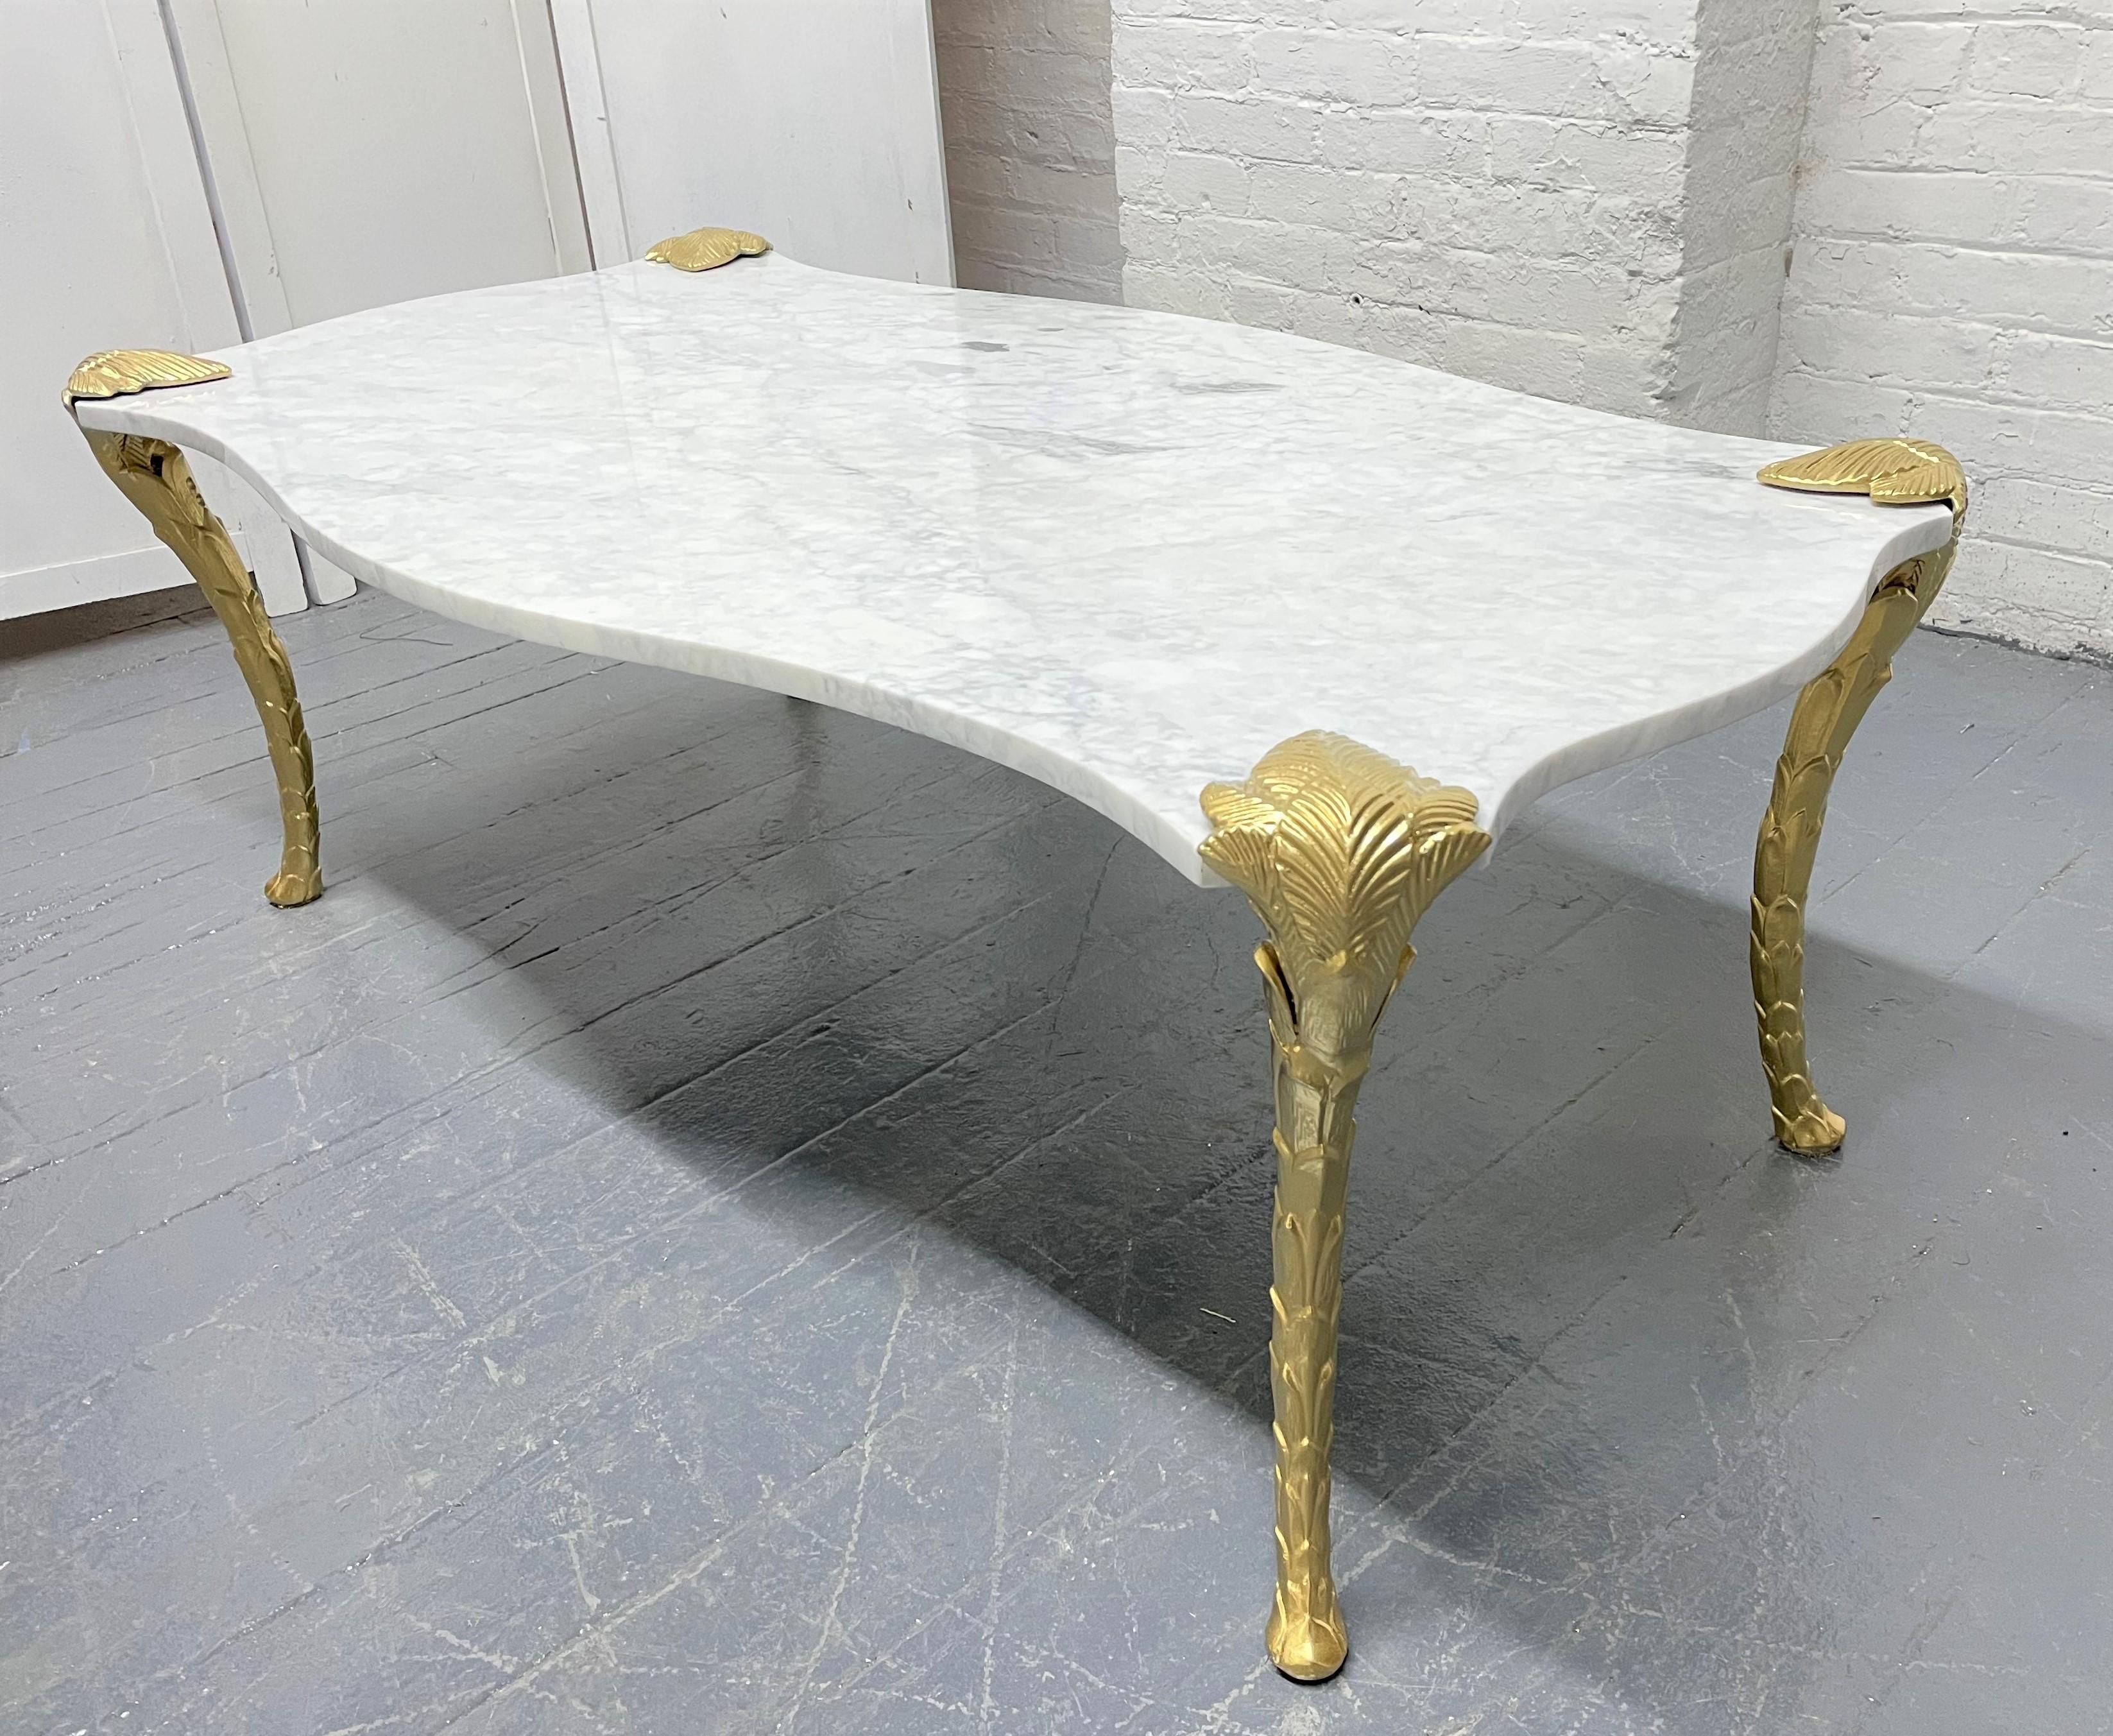 Painted Decorative Carrara Marble Top Coffee Table with Floral Legs For Sale